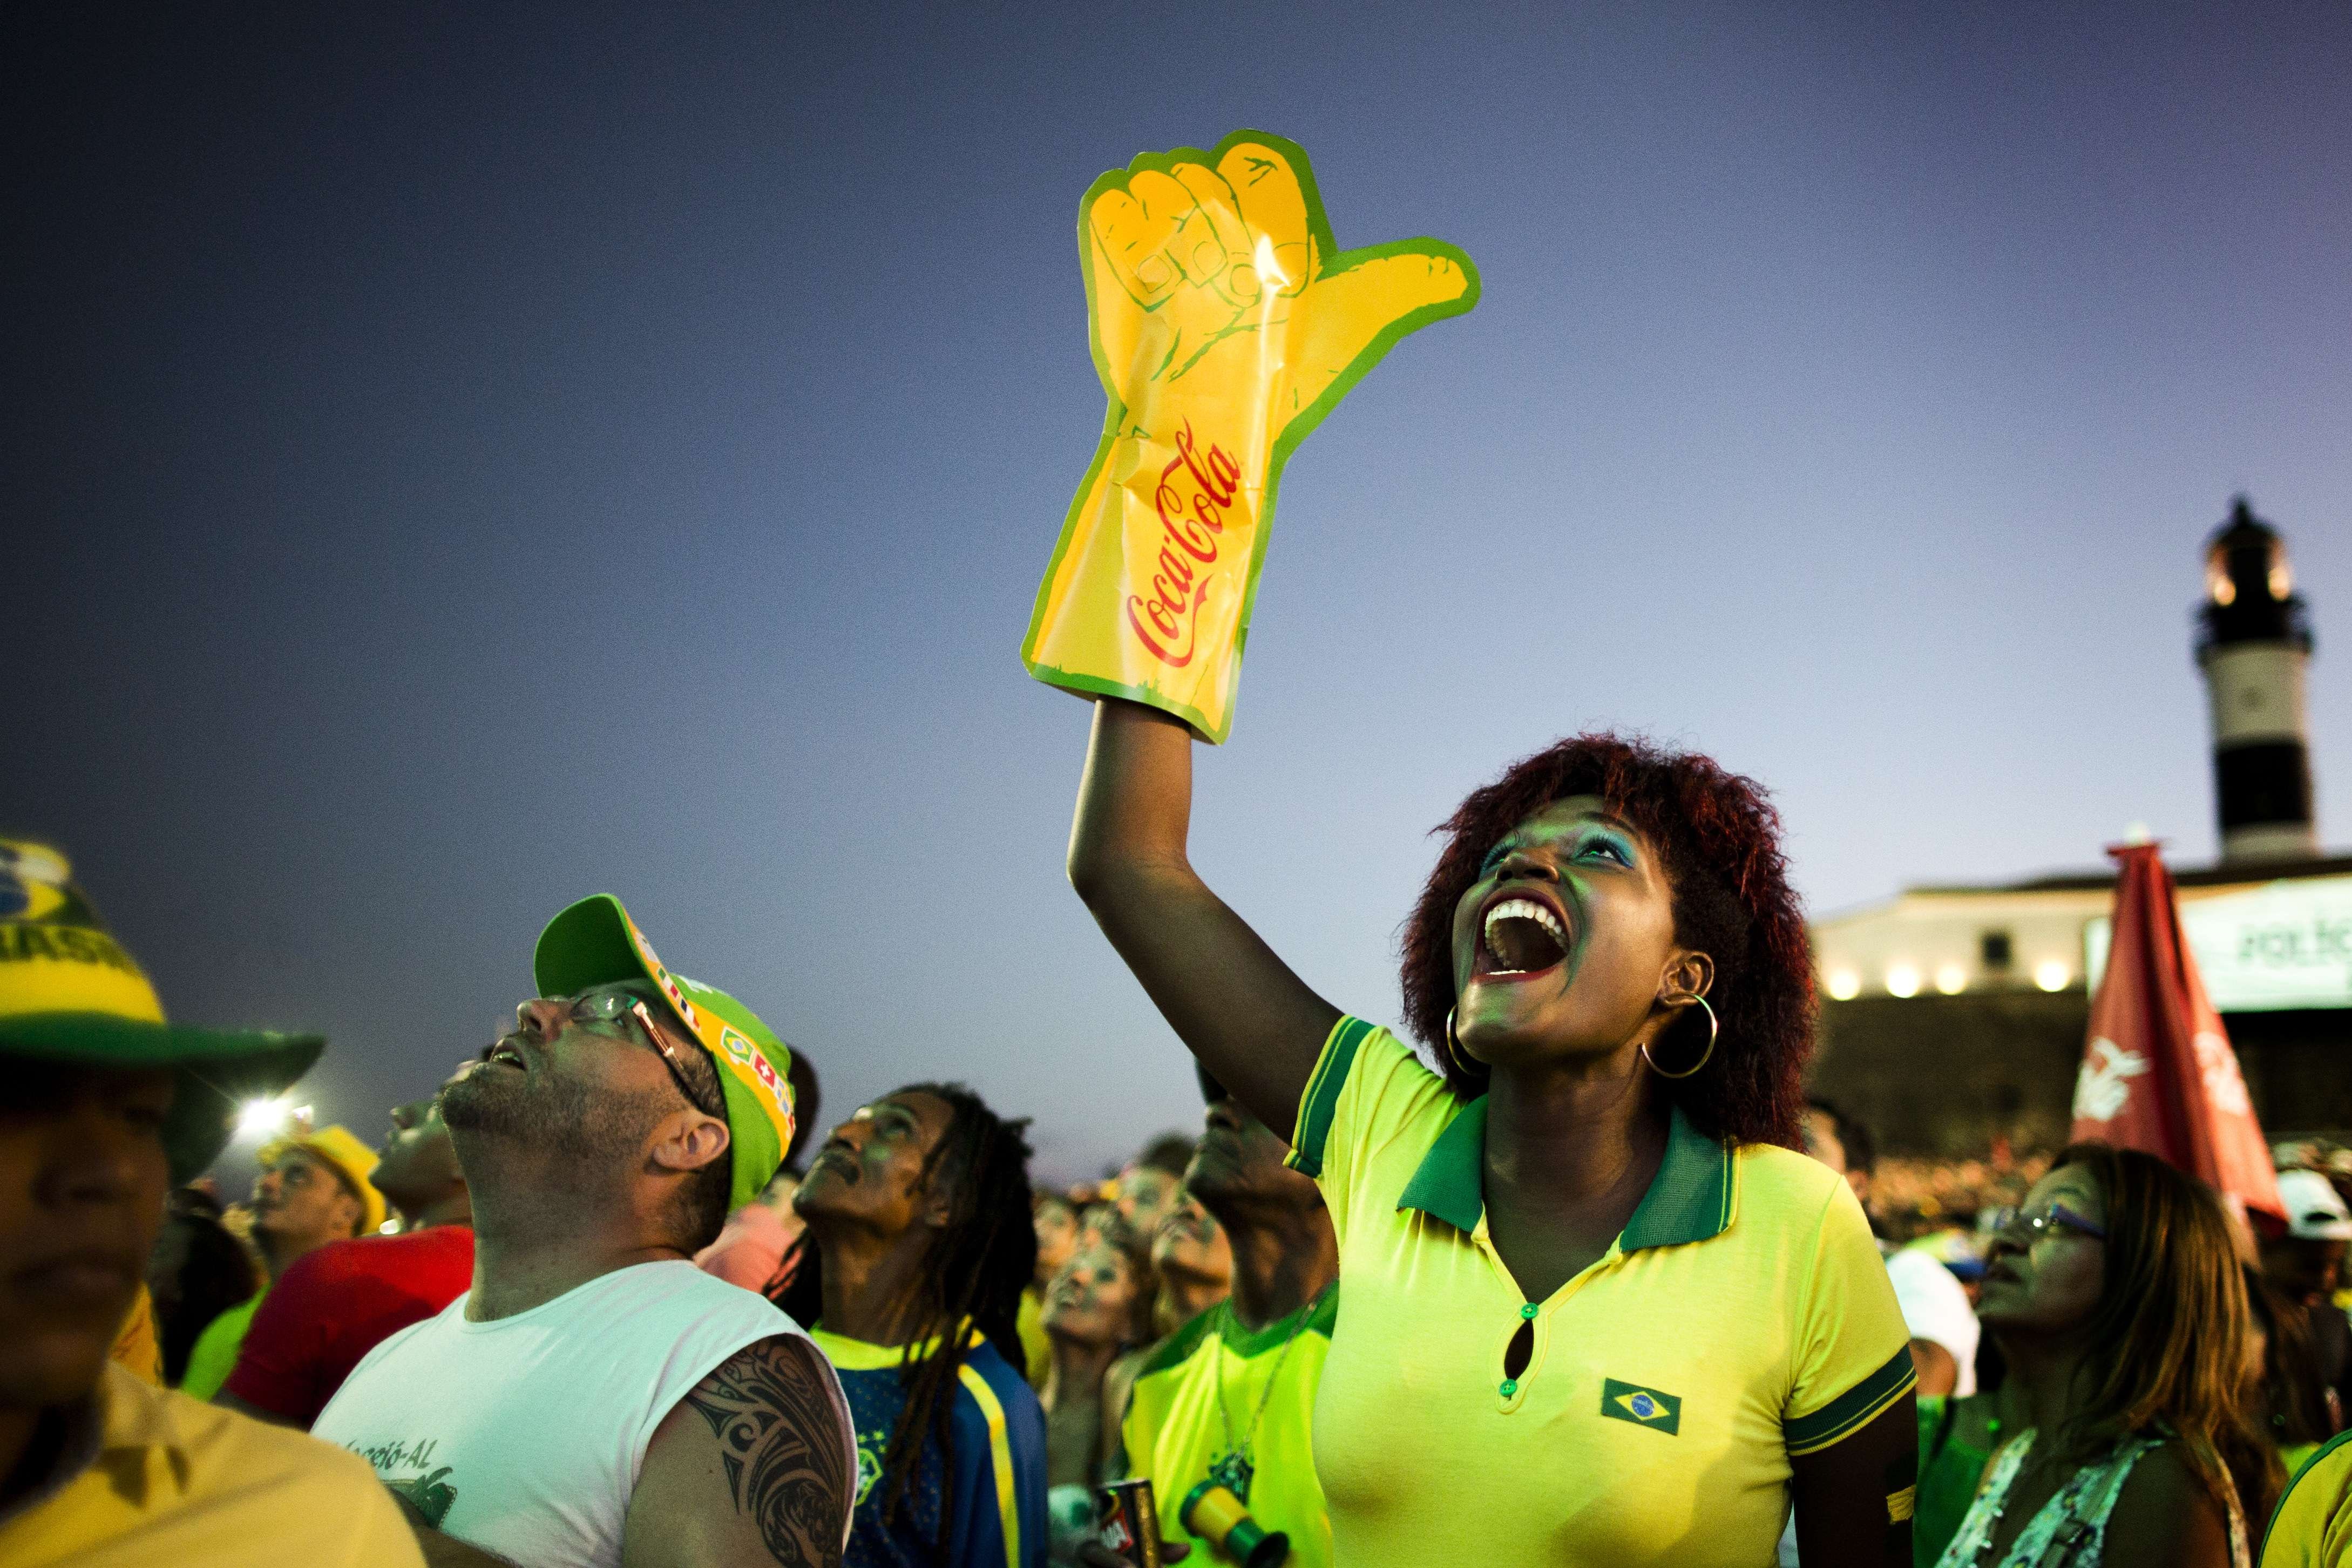 Brazil supporters cheer at FIFA Fan Fest in Salvador, Brazil on June 23, 2014, during the group A match between Brazil and Cameron.